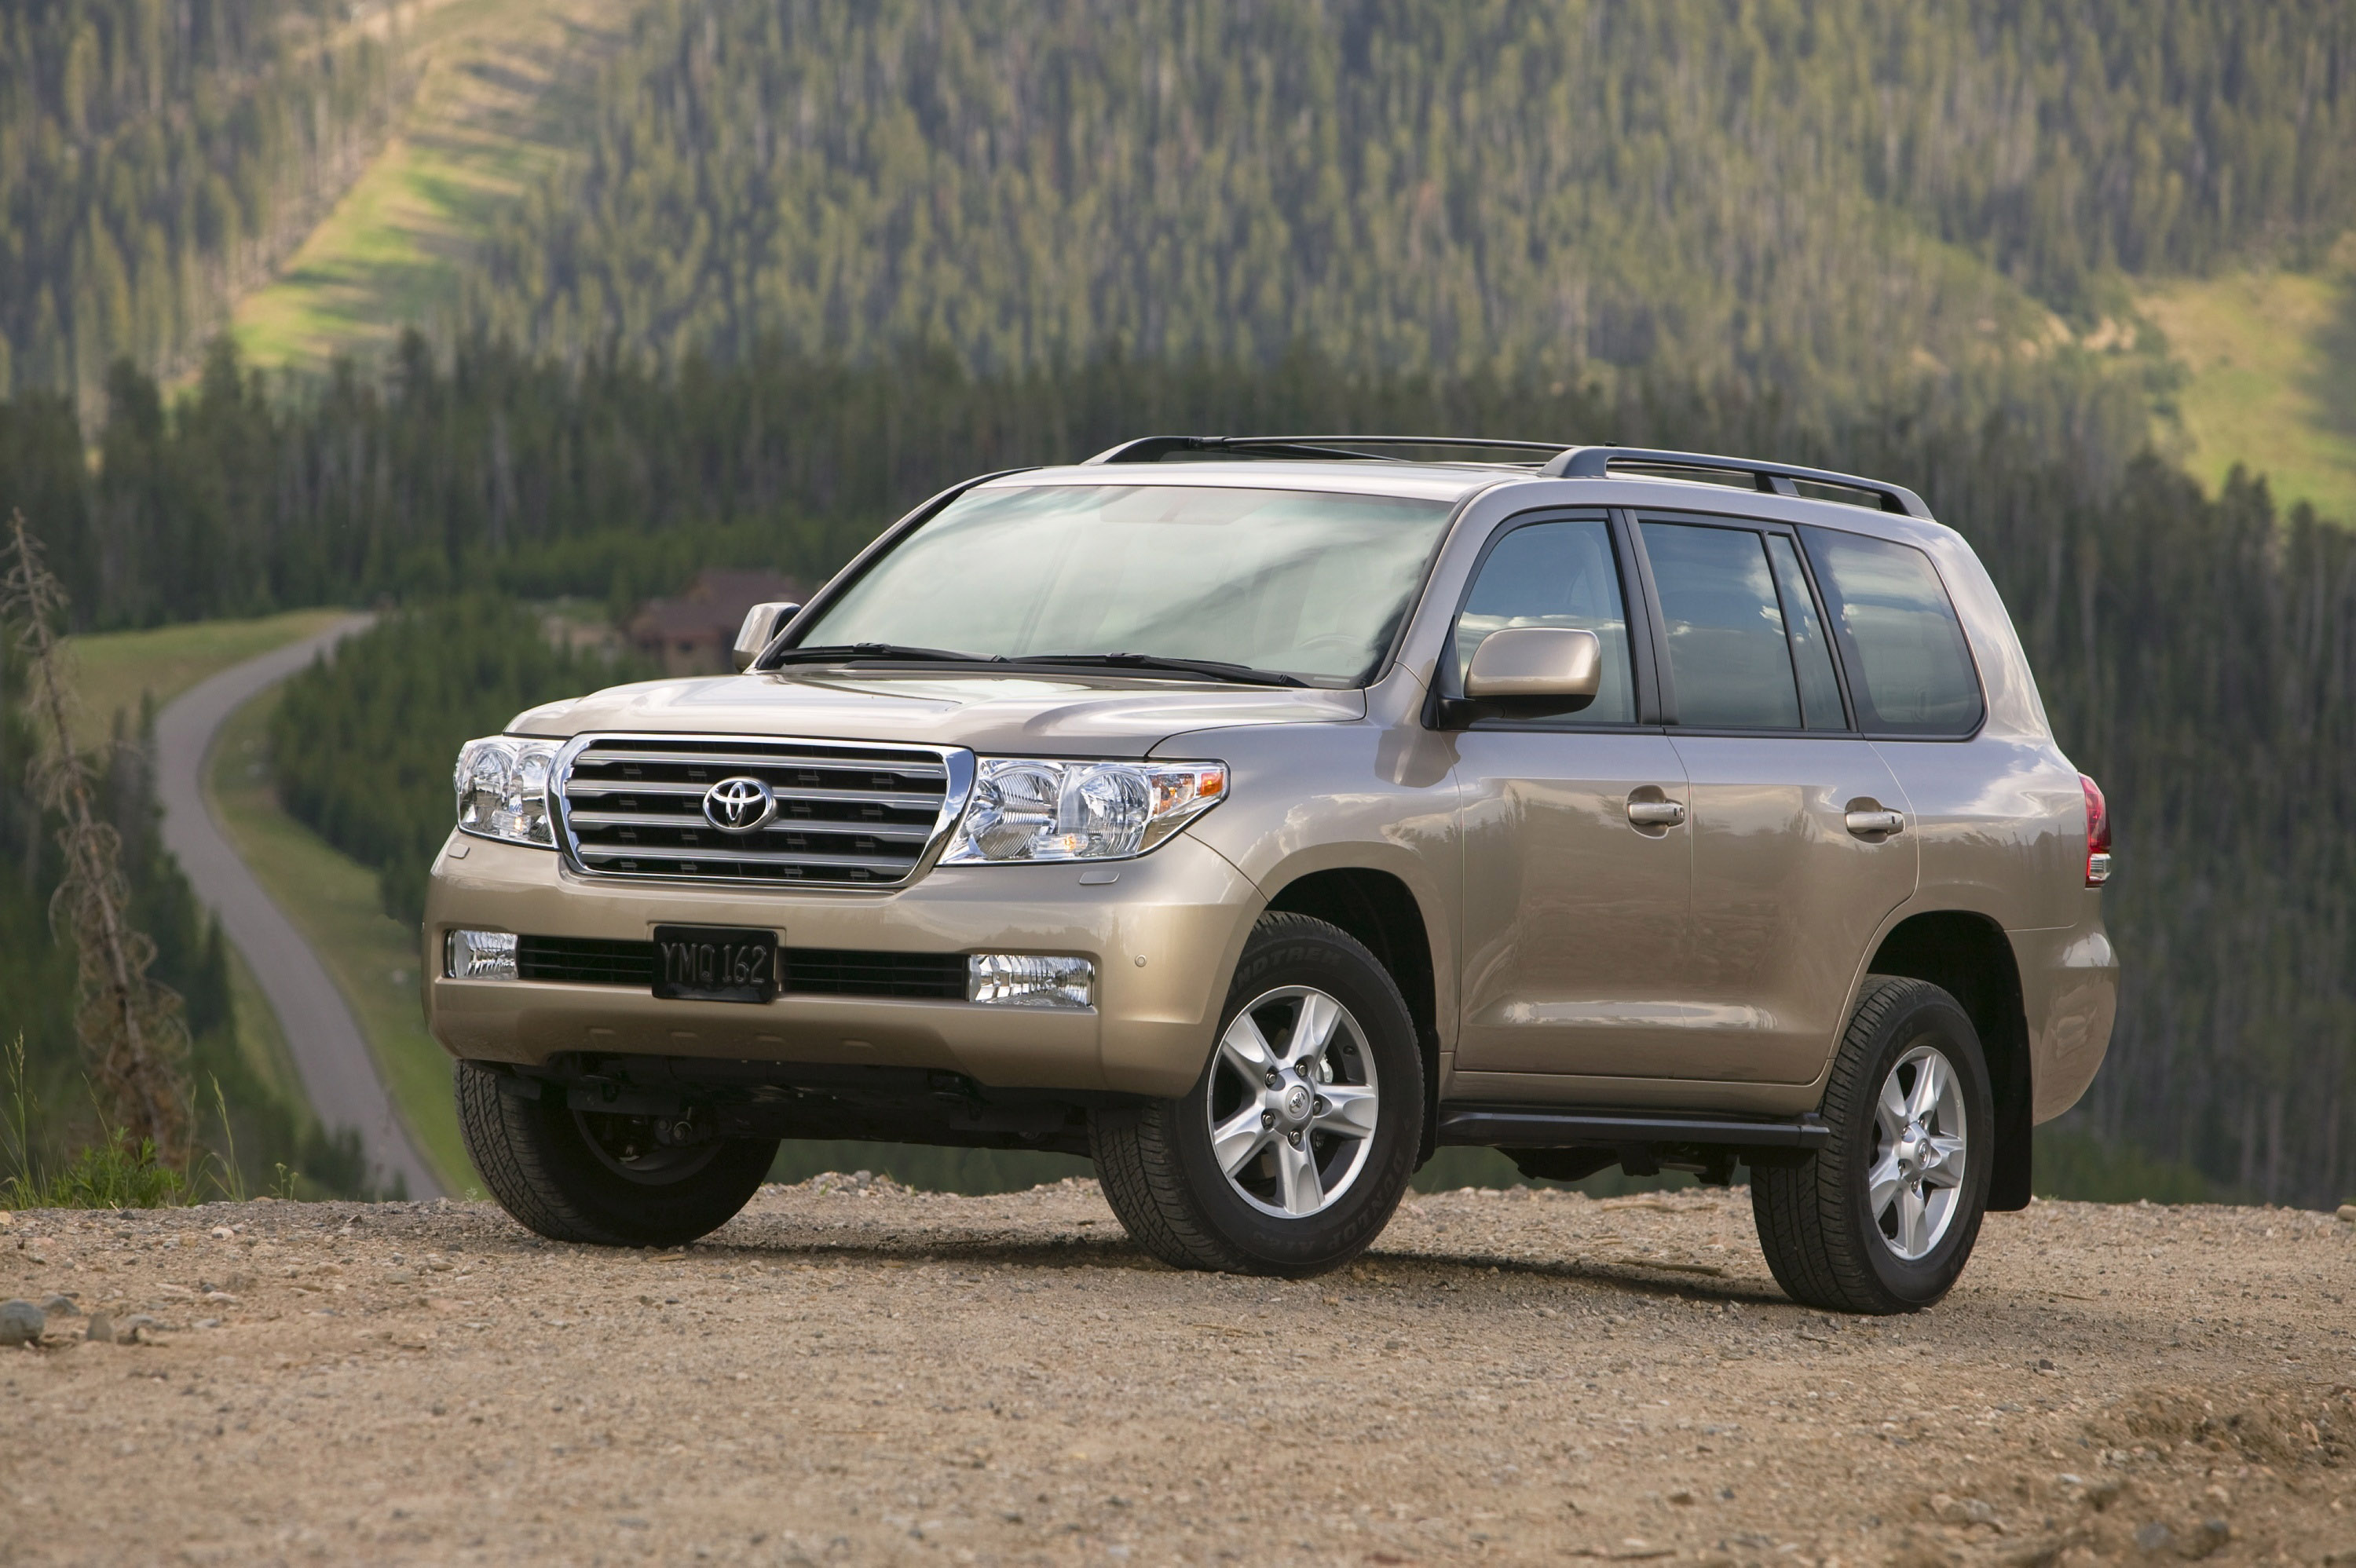 New-Generation Toyota Land Cruiser Combines Legendary Capability With  Welcome Luxury, Quality And Reliability